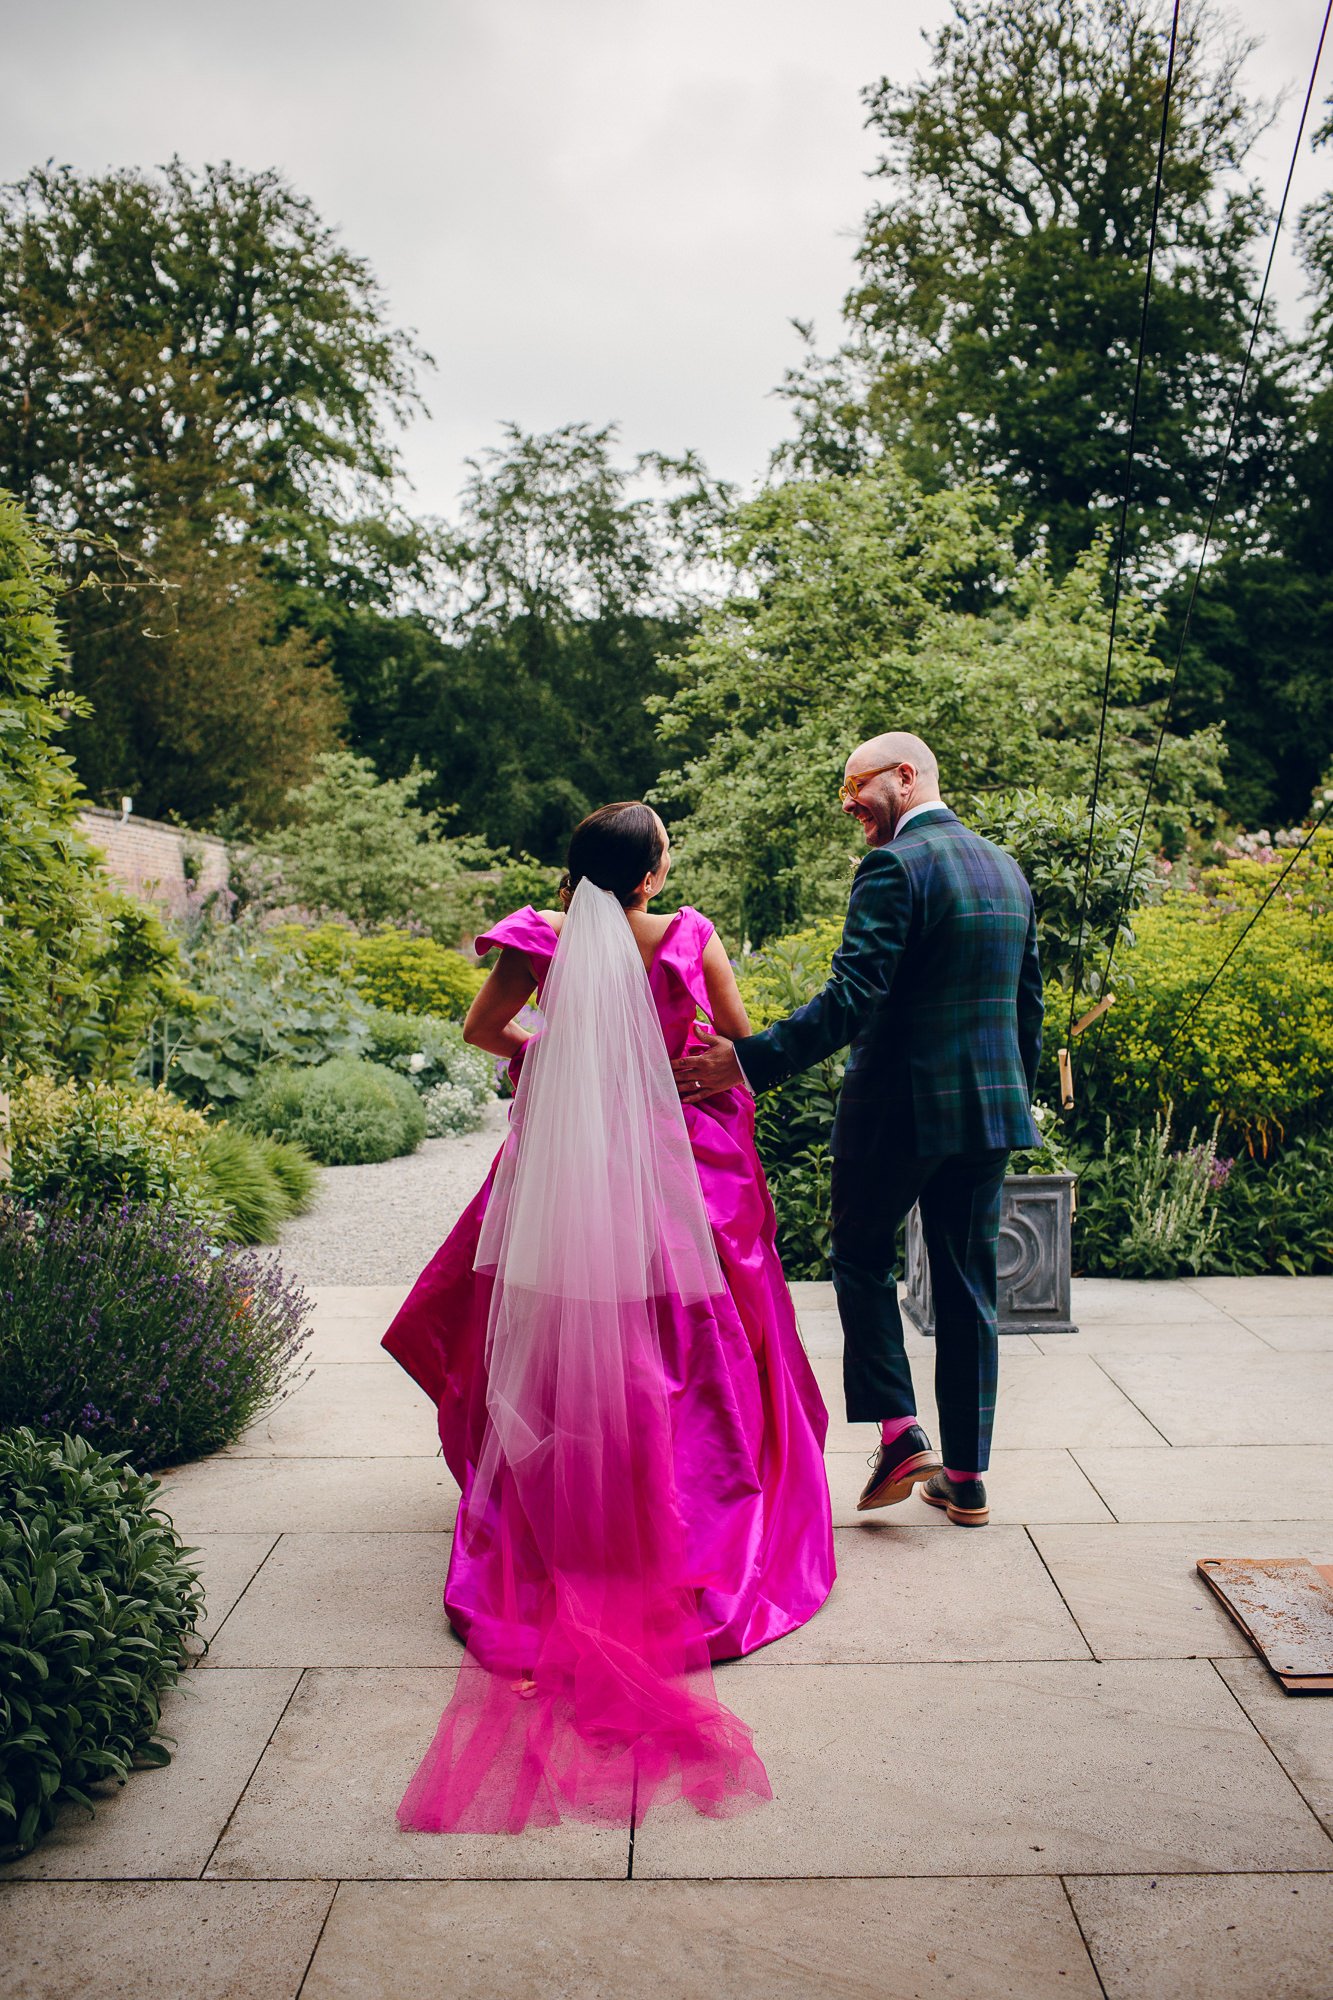  A natural moment caught on camera by the documentary style wedding photographer as the bride and groom walk away from the camera, holding hands and laughing as they make their way towards a garden in the grounds of their wedding venue. The bride is 